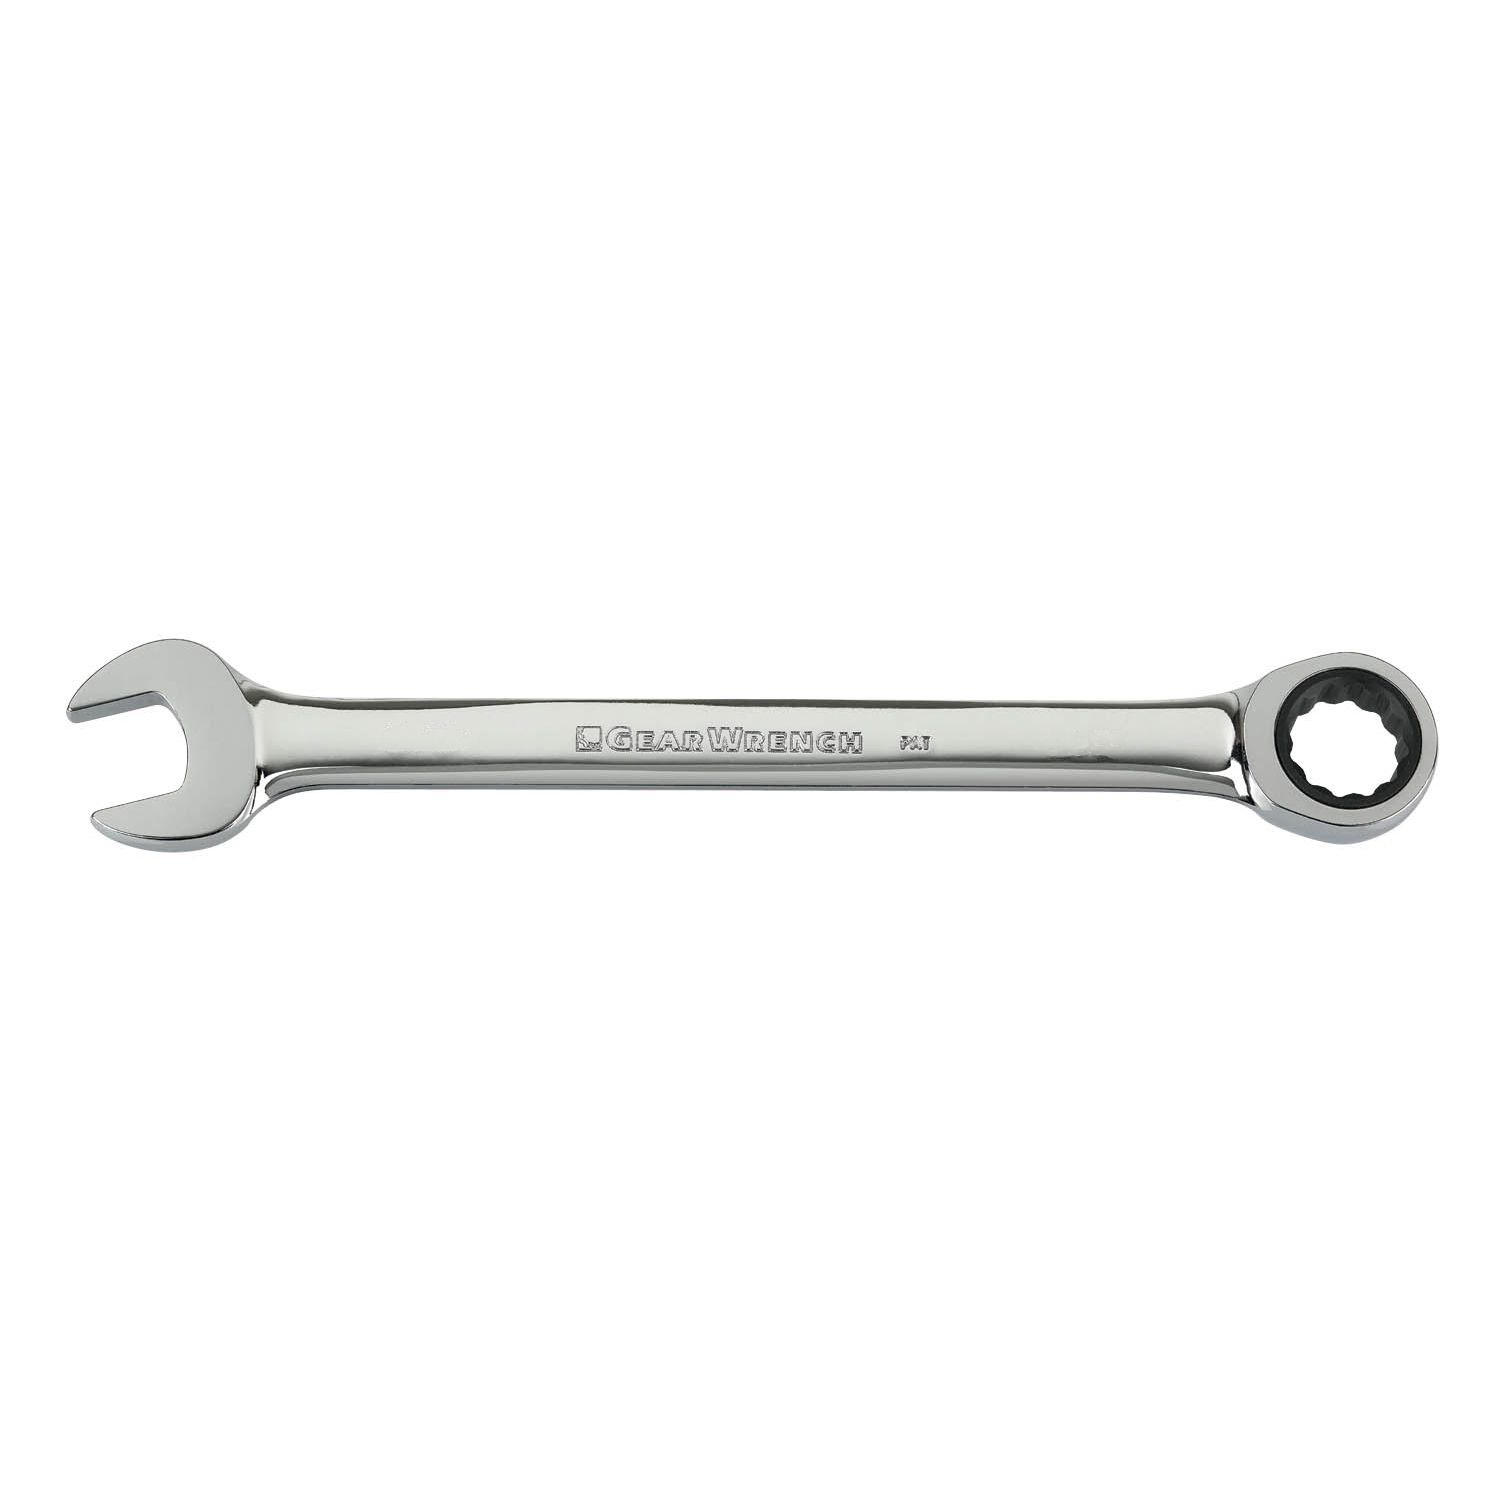 731/40 19 Combination Wrench731 19mm 